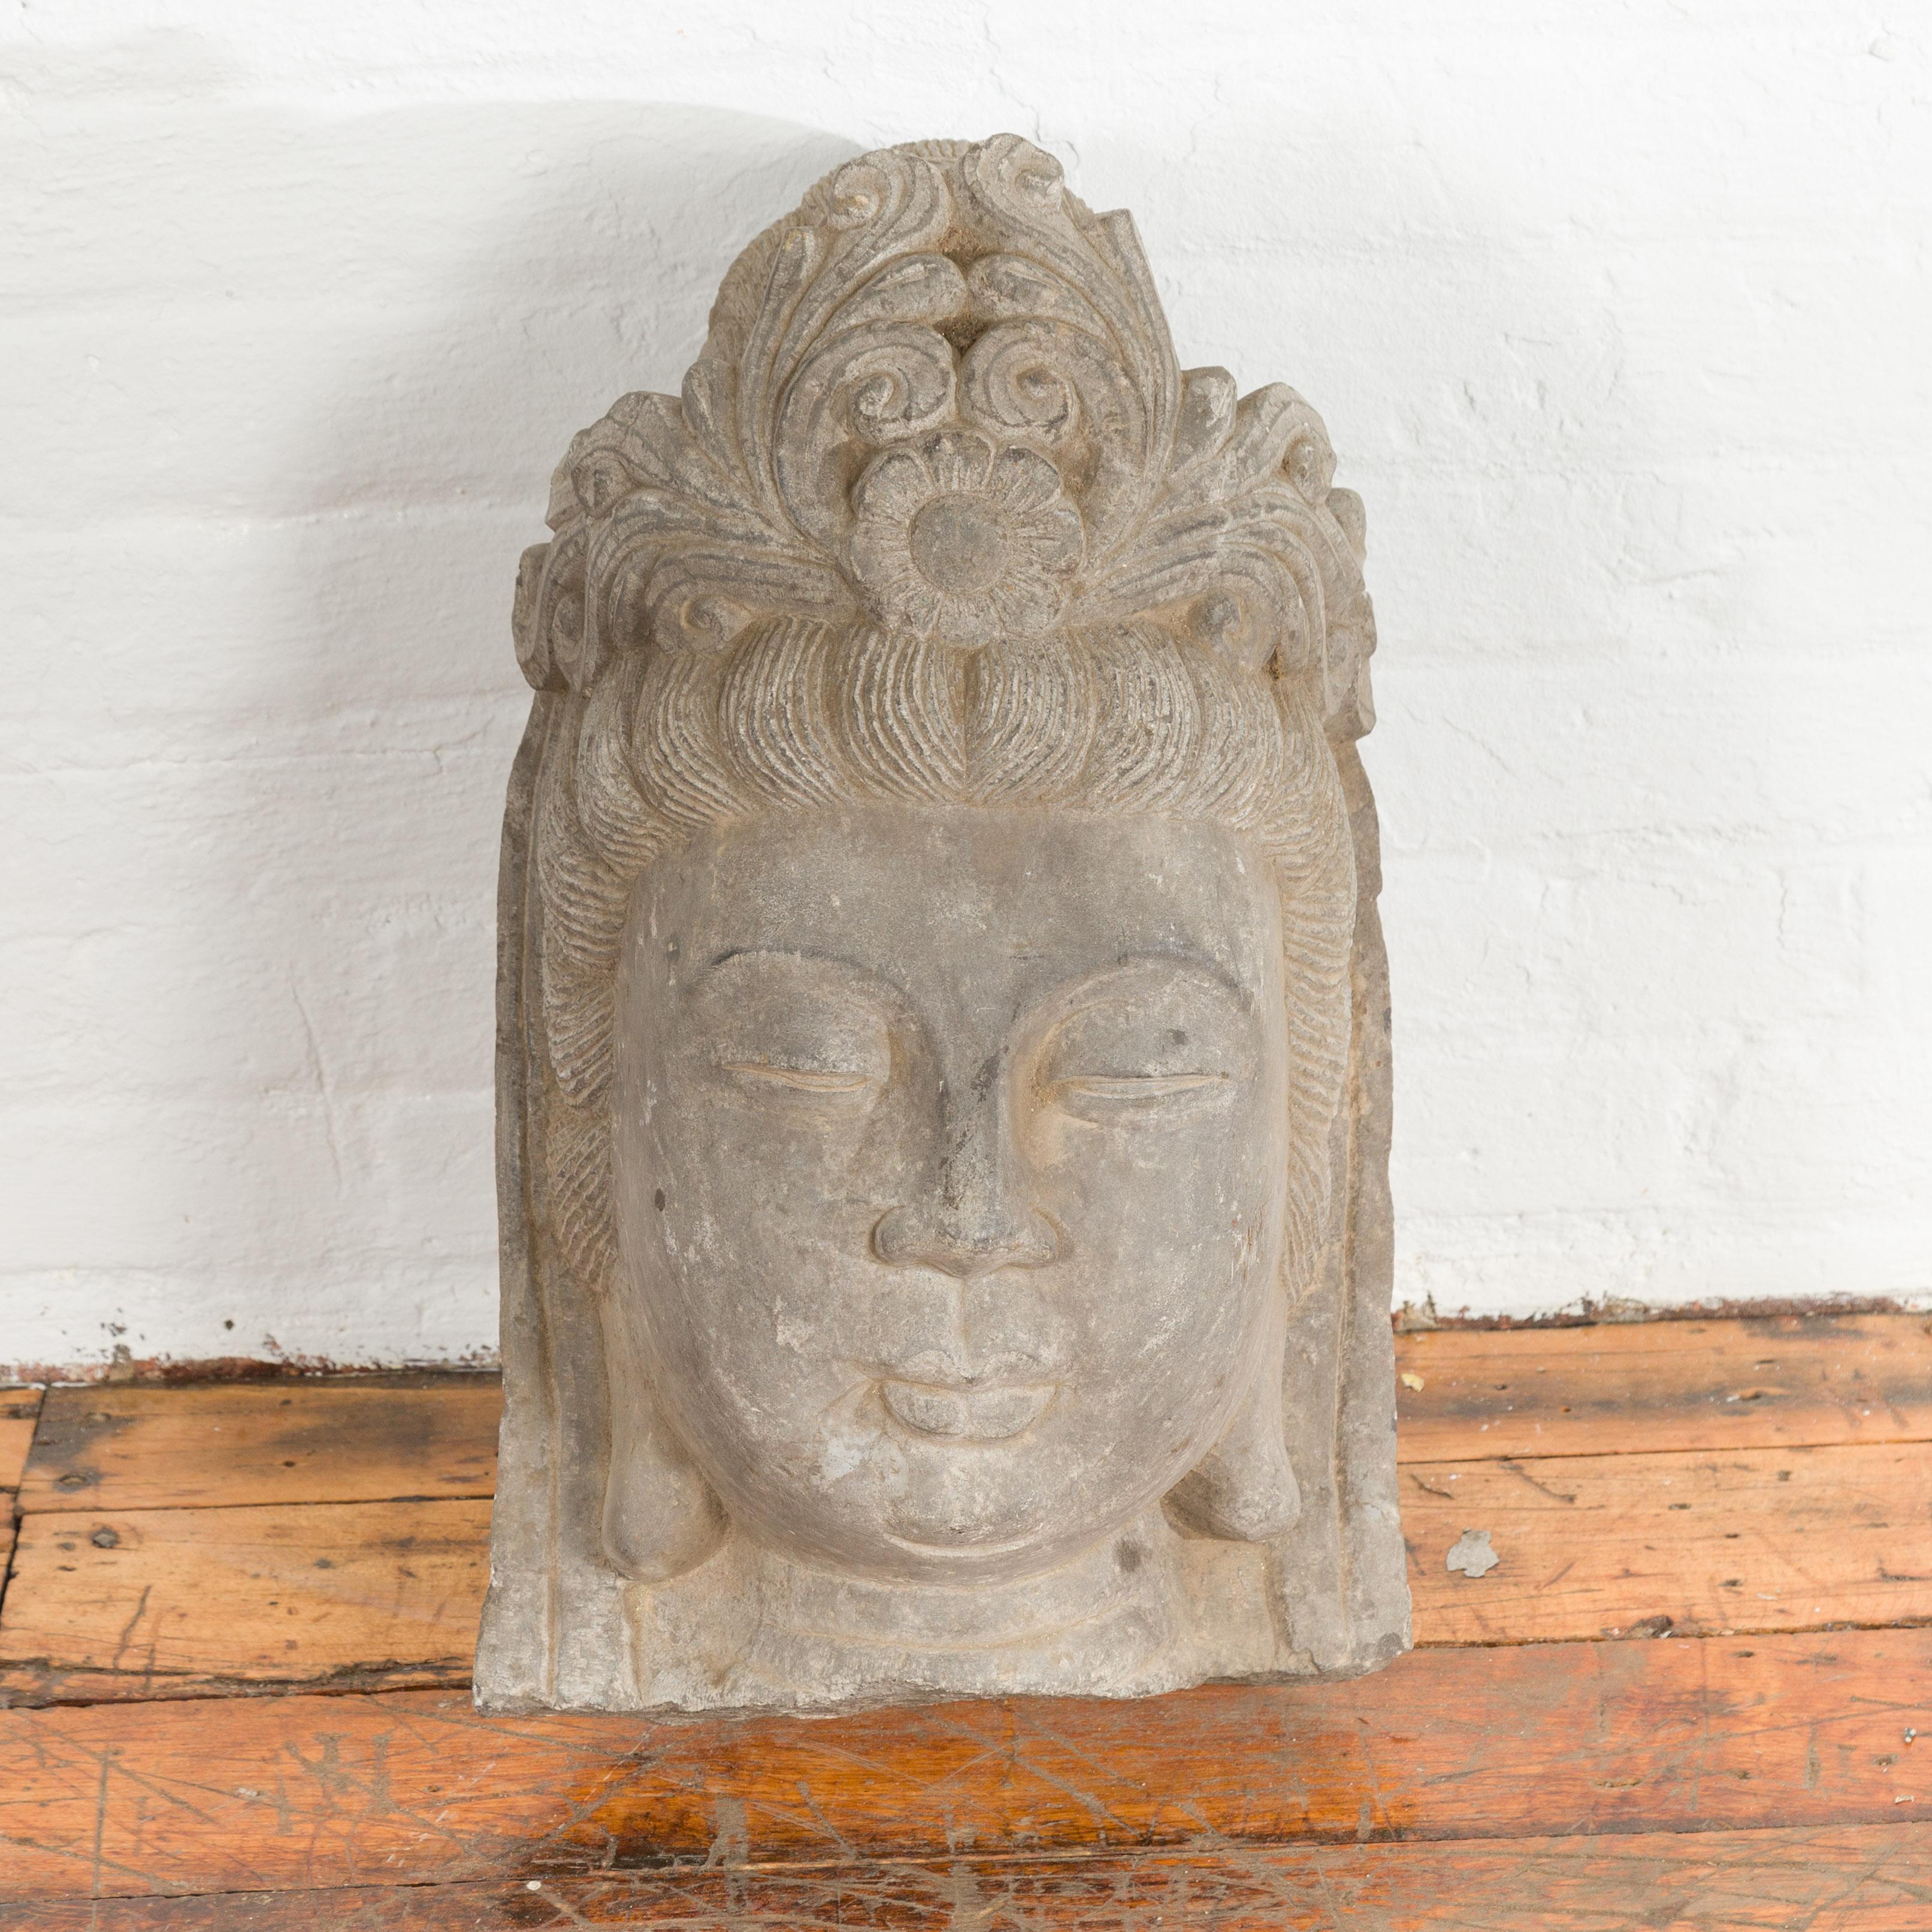 A large Chinese vintage carved stone bust of Guanyin from the mid 20th century. Found in southern China, this large carved stone bust captivates us with its calm depiction of Guanyin, Bodhisattva of Compassion. Topped with an ornate headdress,